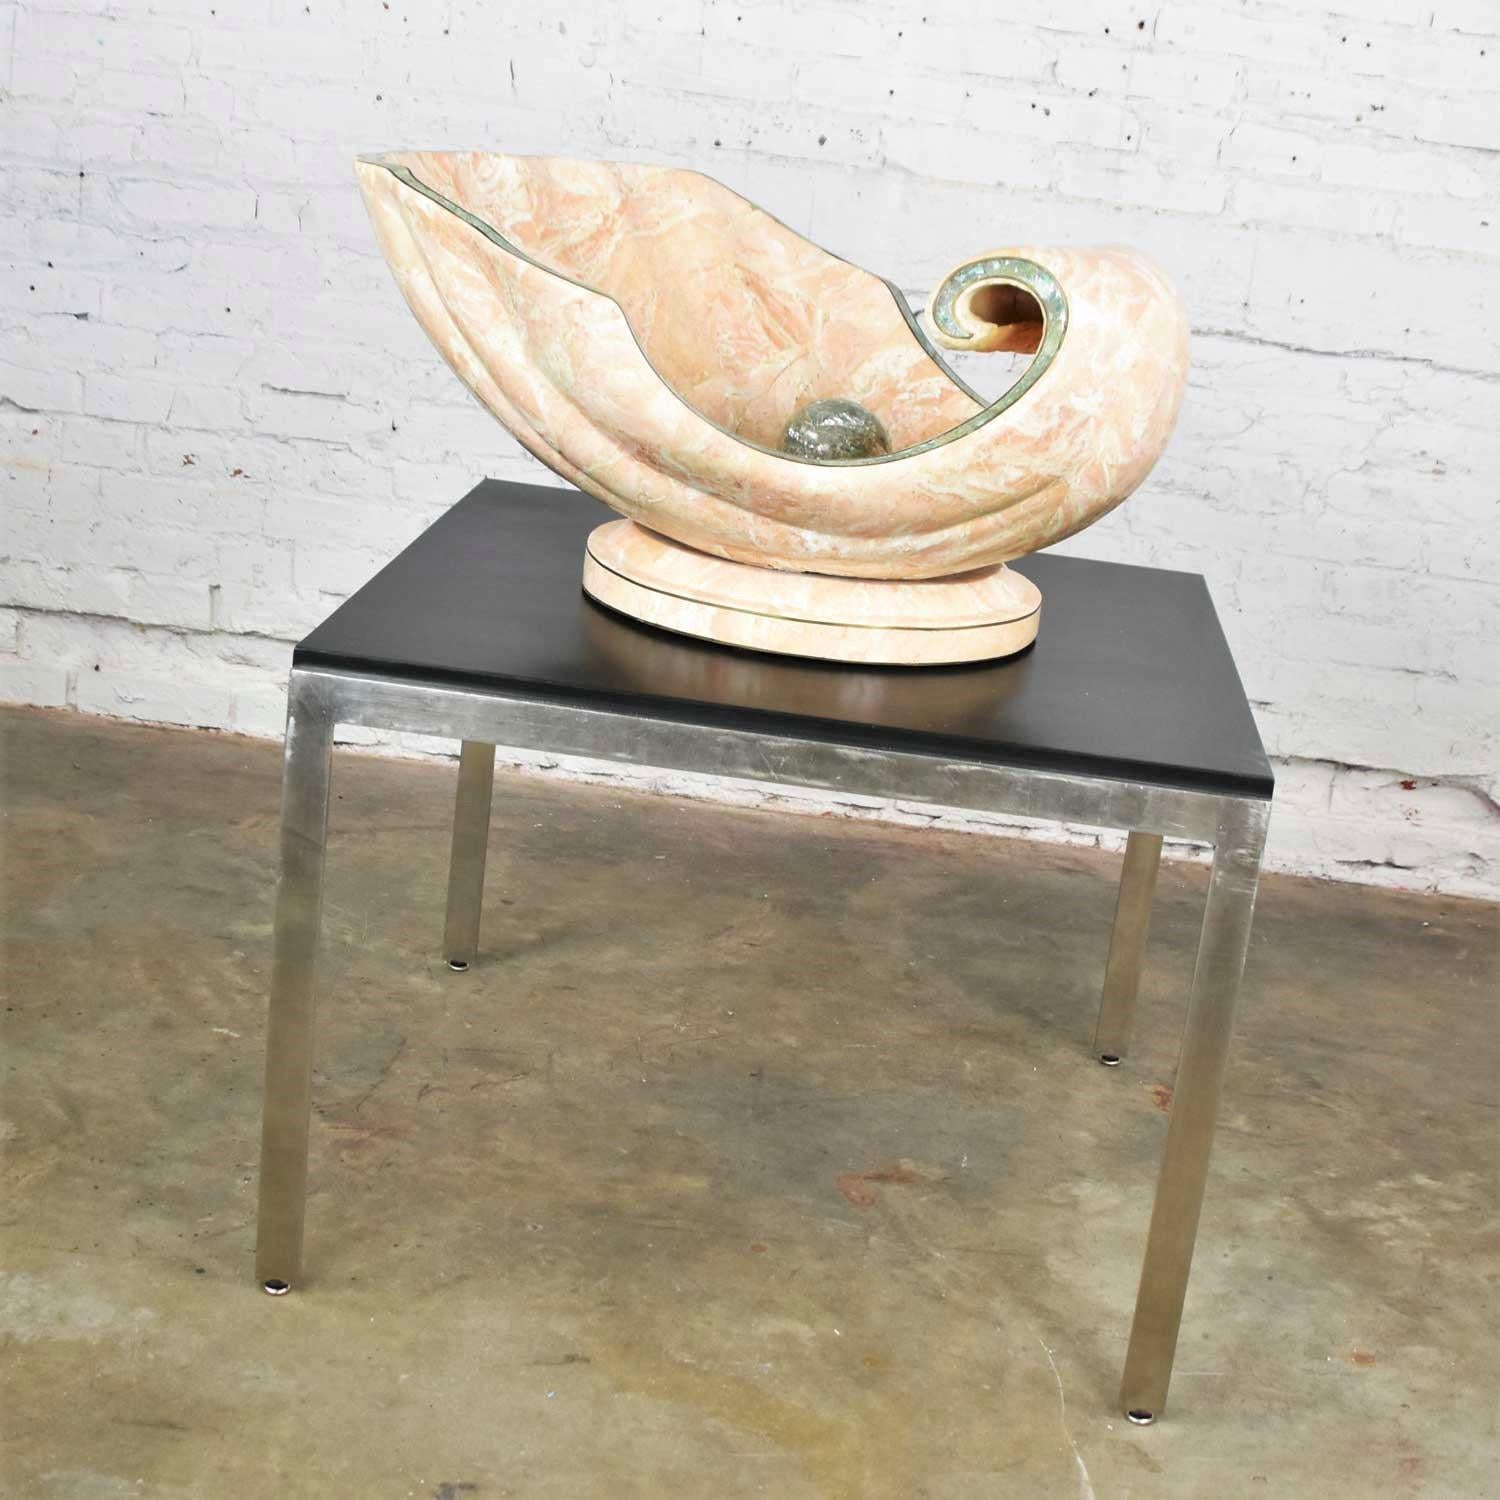 Incredible monumental tessellated marble clam shell with a giant pearl in its center used as a coffee table base with a 48-inch glass top with ogee edge. It is in wonderful vintage condition. It does have a small place where it has been restored